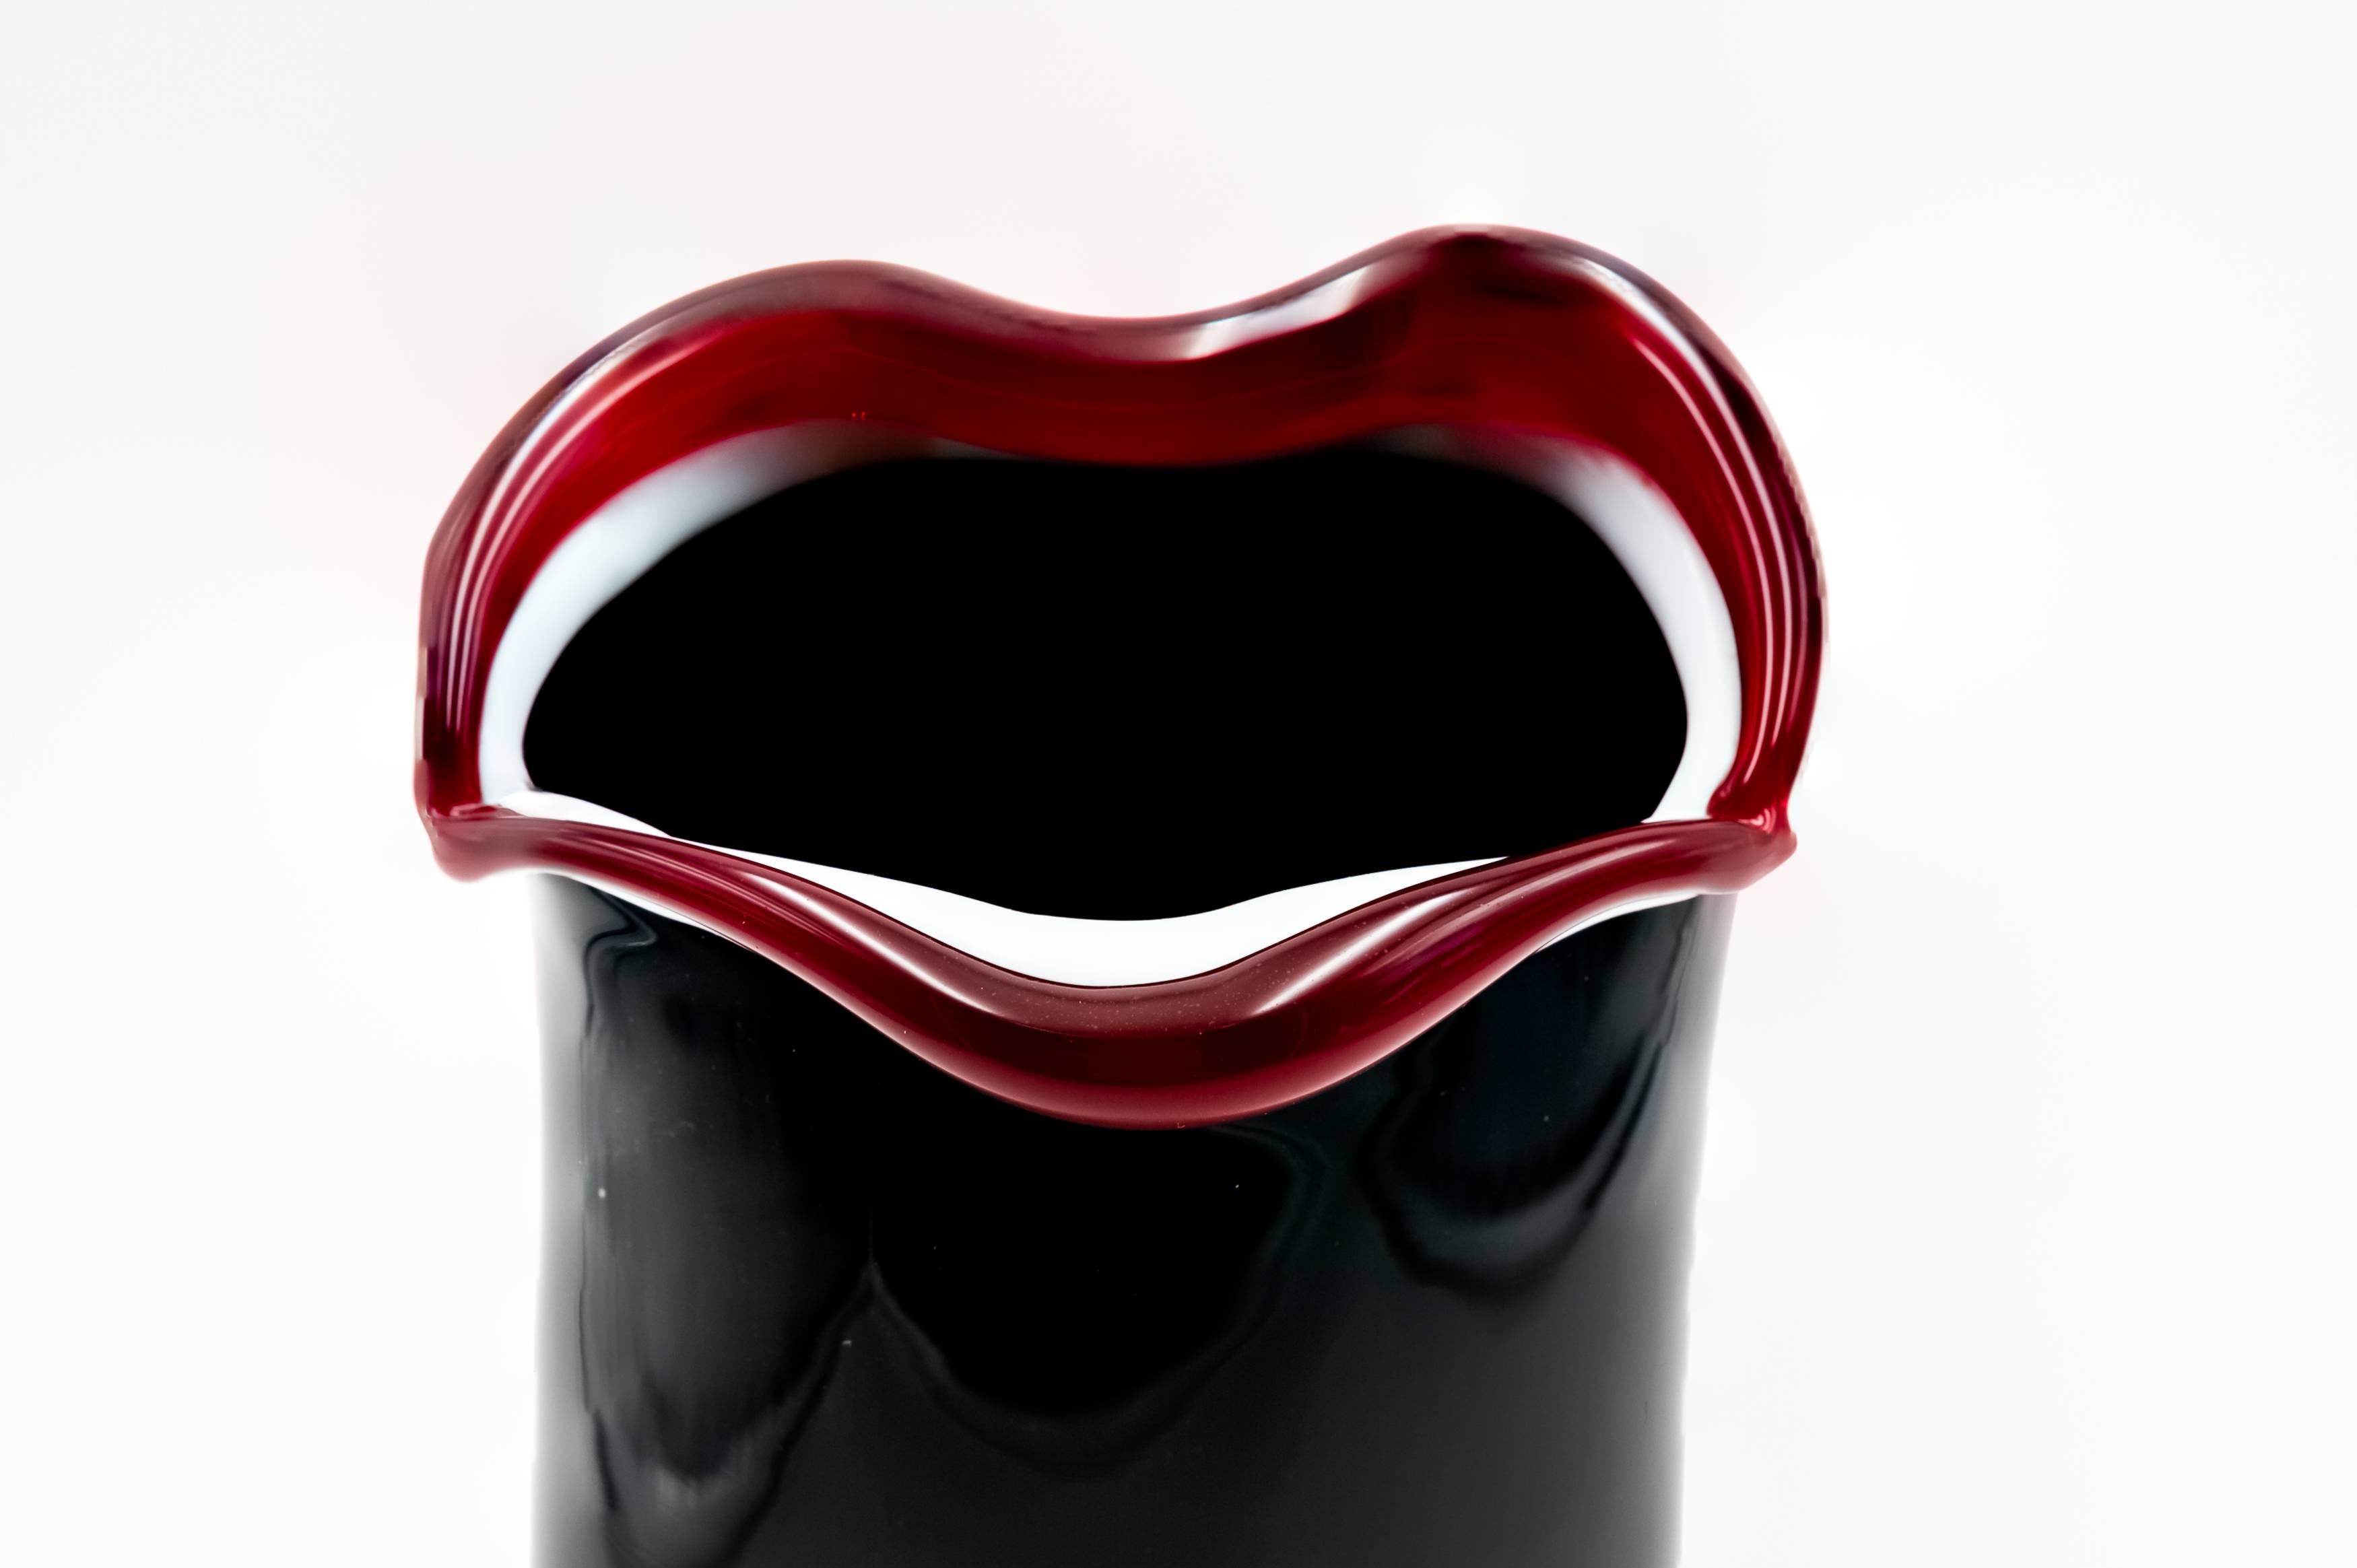 A smile vase designed by Fulvio Bianconi in the 1990s and produced by Venini. 
One of the latest designs by Bianconi.
Very nice black color with applied accents of white and red glass.
Be sure to check our other listings because we have 5 different